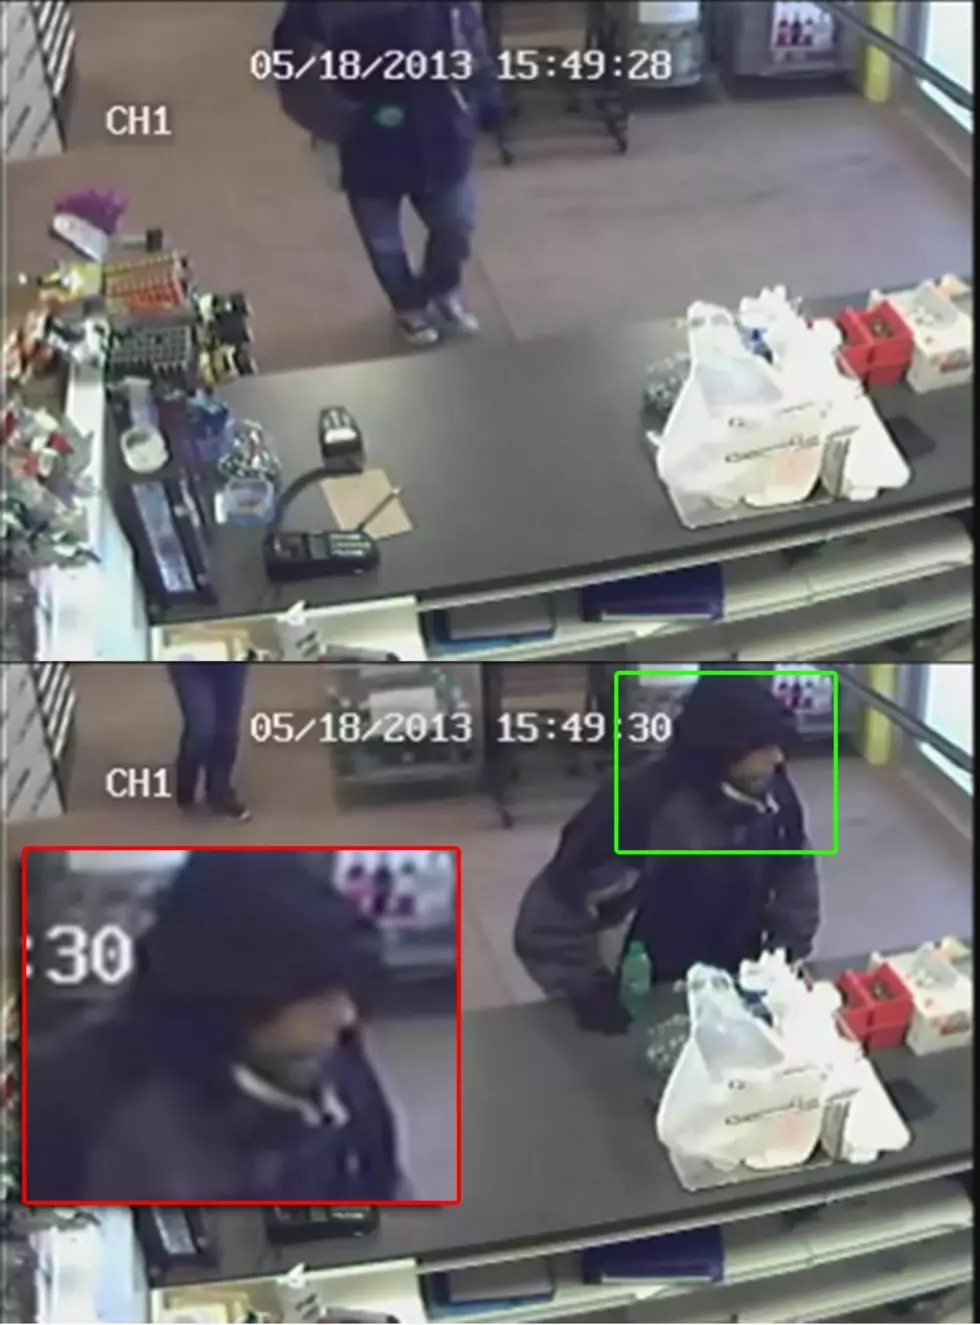 Grand Junctions True Dollar Was Robbed &#038; You Can Help Catch the Crook-VIDEO